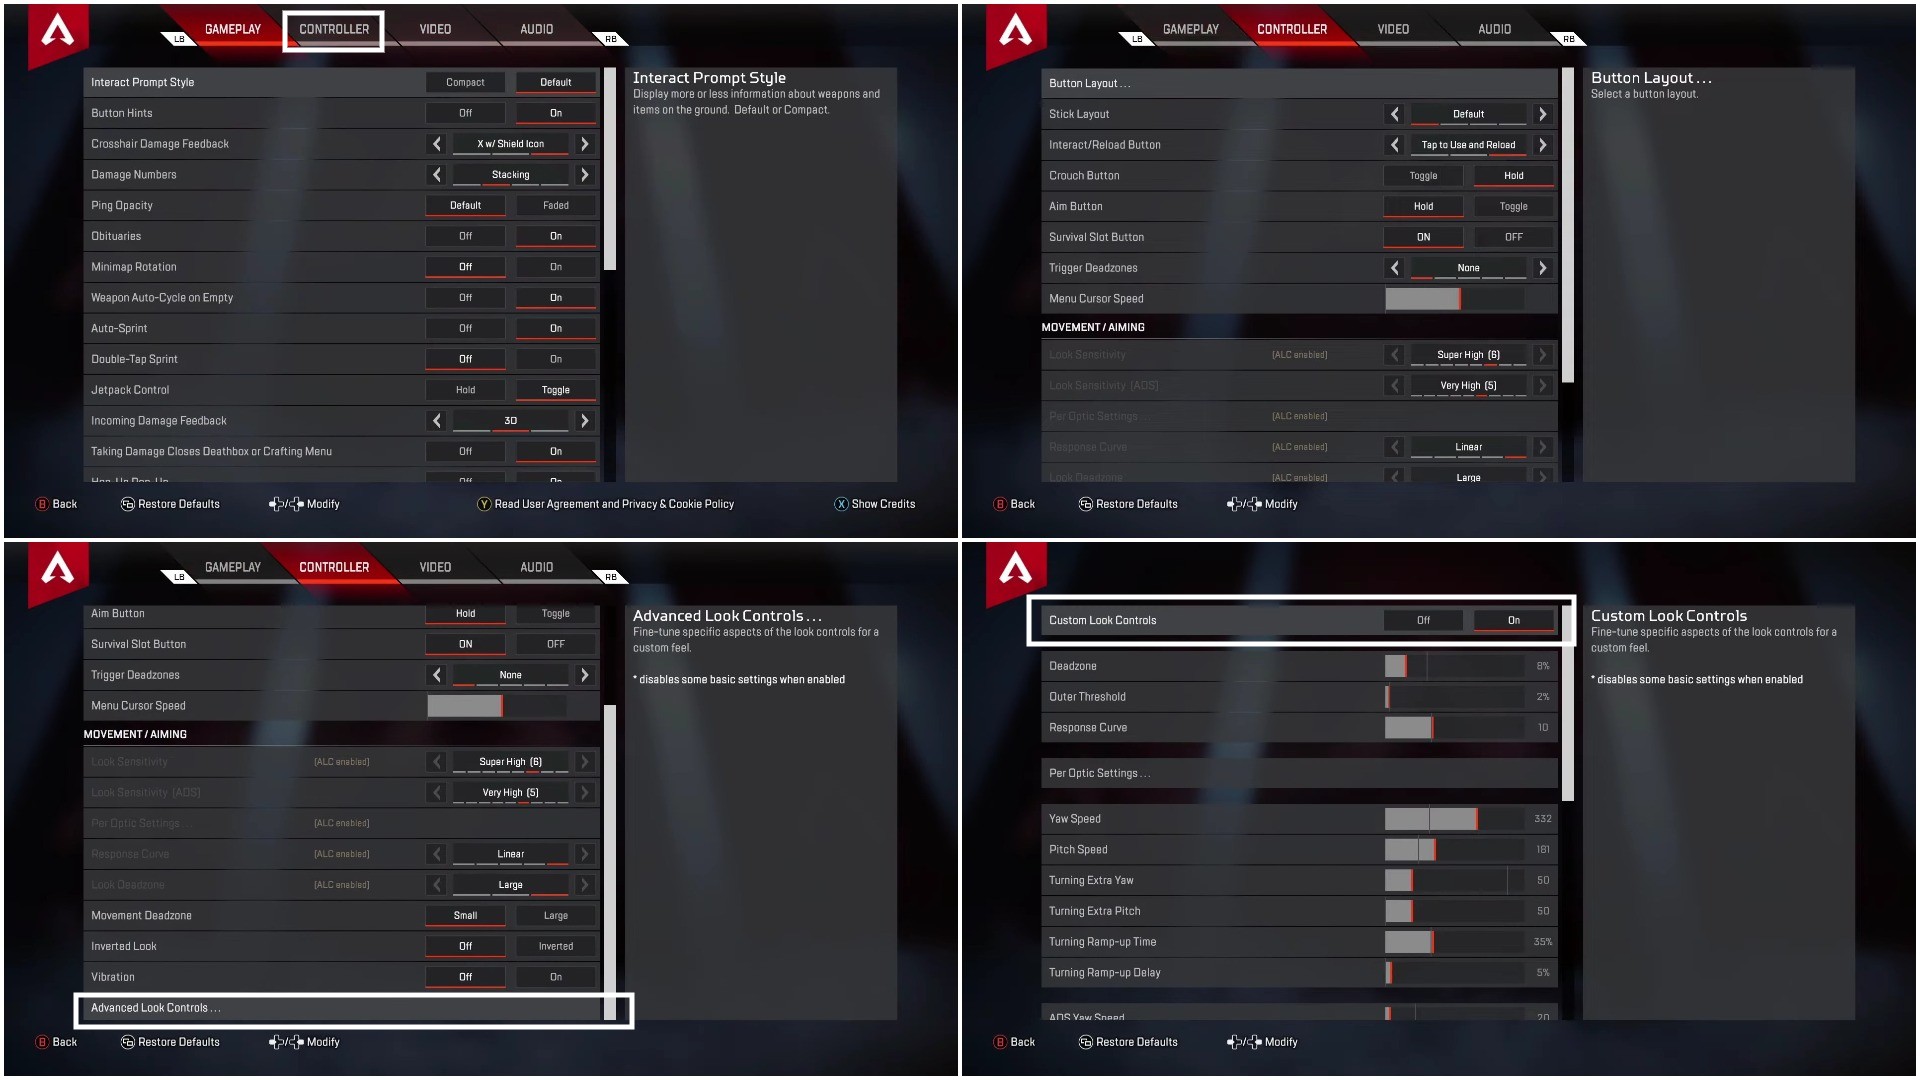 ALC setting how to enable in Apex